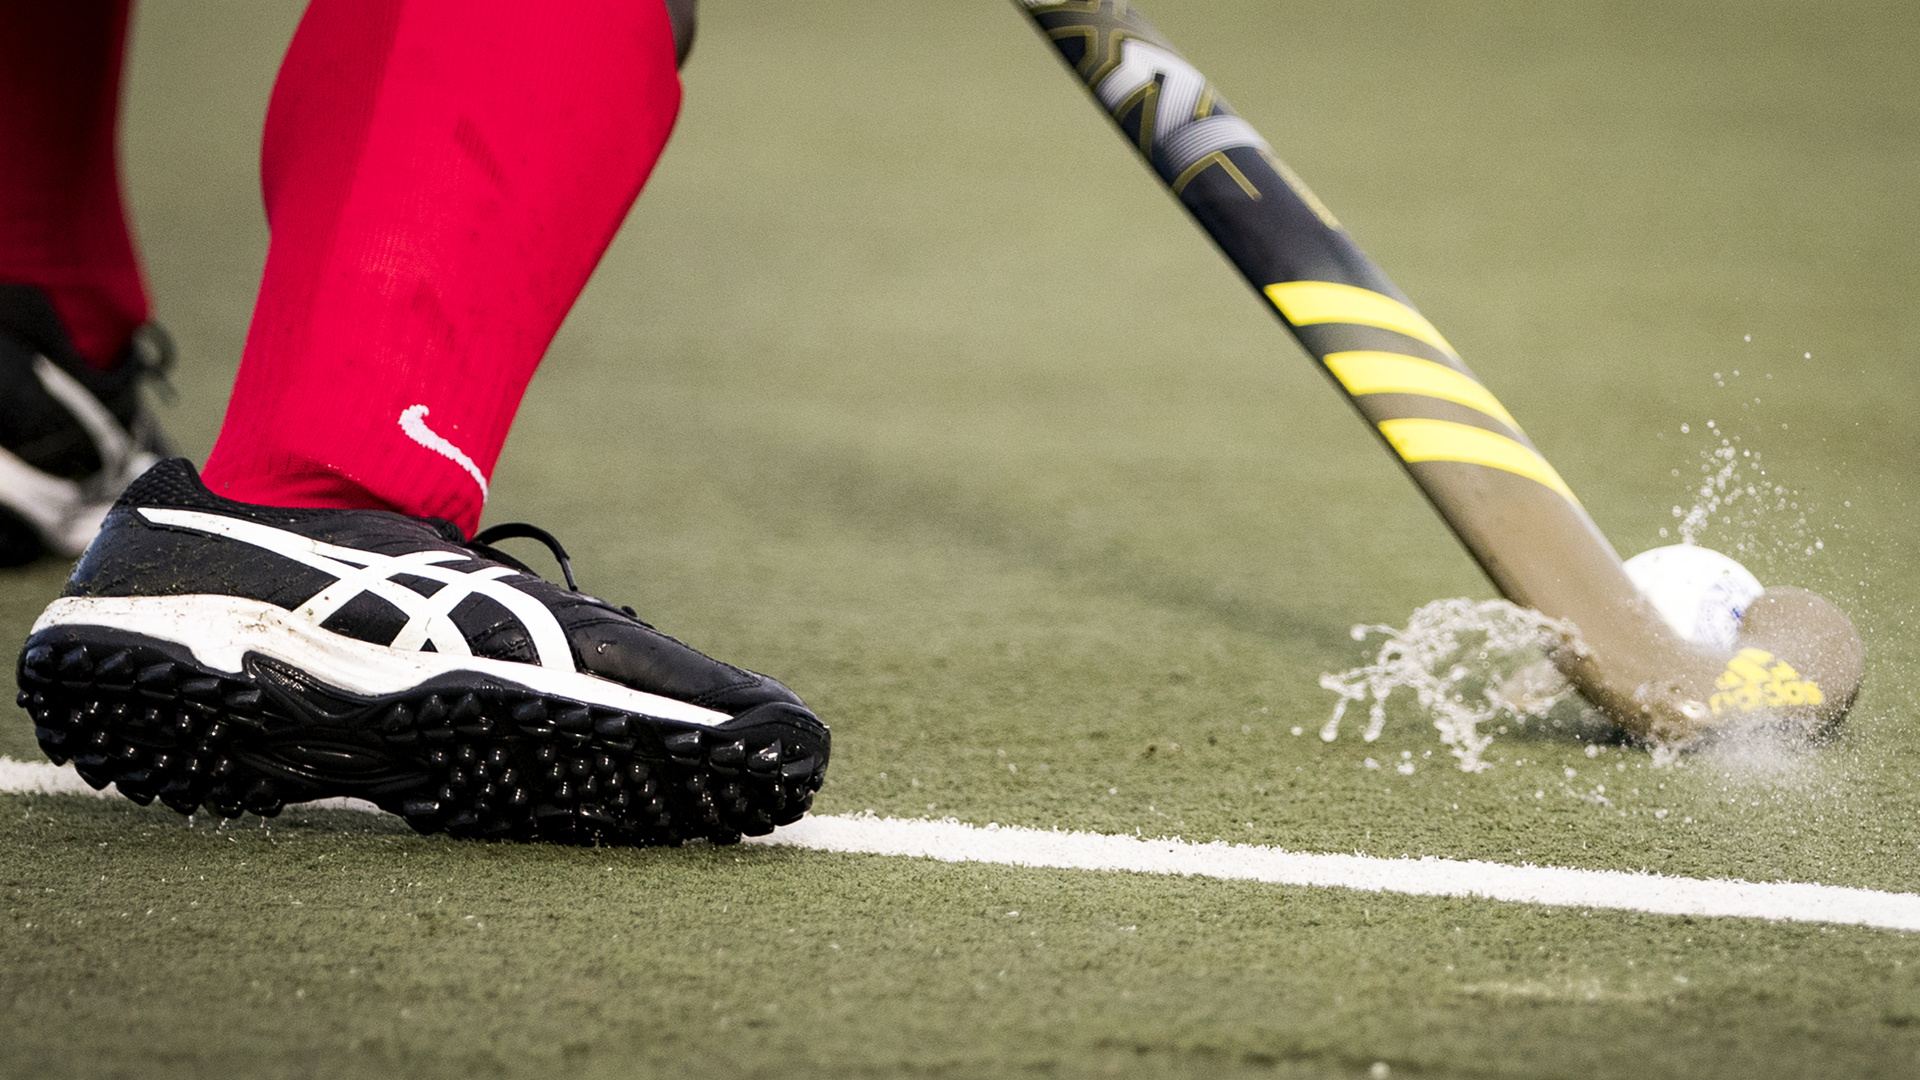 Field Hockey: A player strikes a ball with his stick, Competitive ball sport. 1920x1080 Full HD Background.